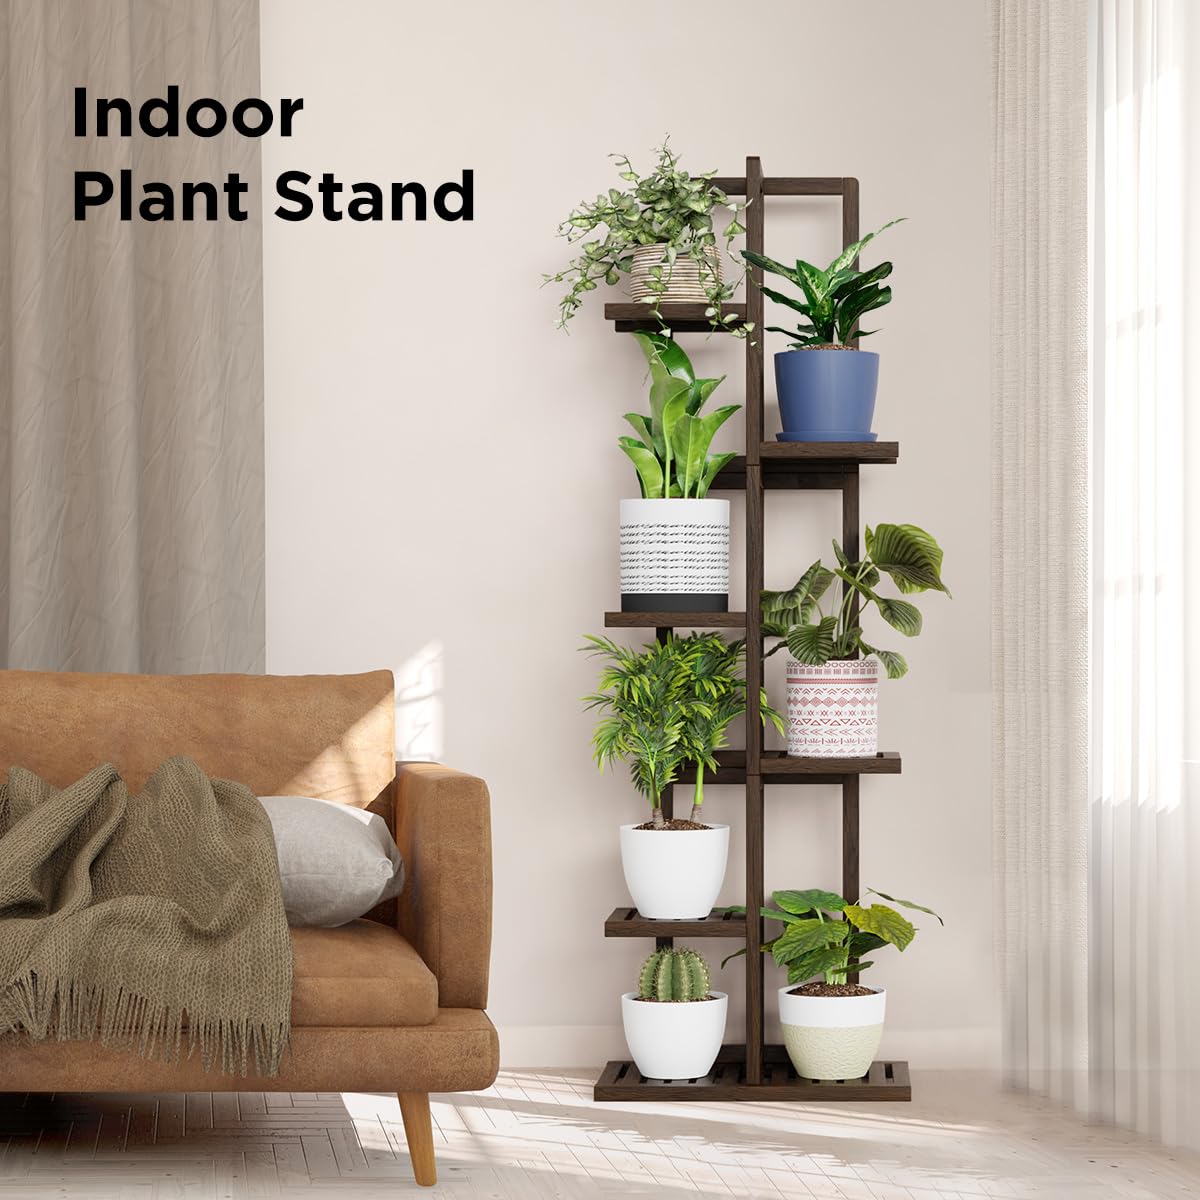 Tall Plant Stand, Bamboo Plant Stand Indoor & Outdoor 6 Tier 7 Potted Plant Shelf Rack for Multiple Plants & Flower Pot, Corner Planter Stand Holder Display for Living Room Office Balcony Garden